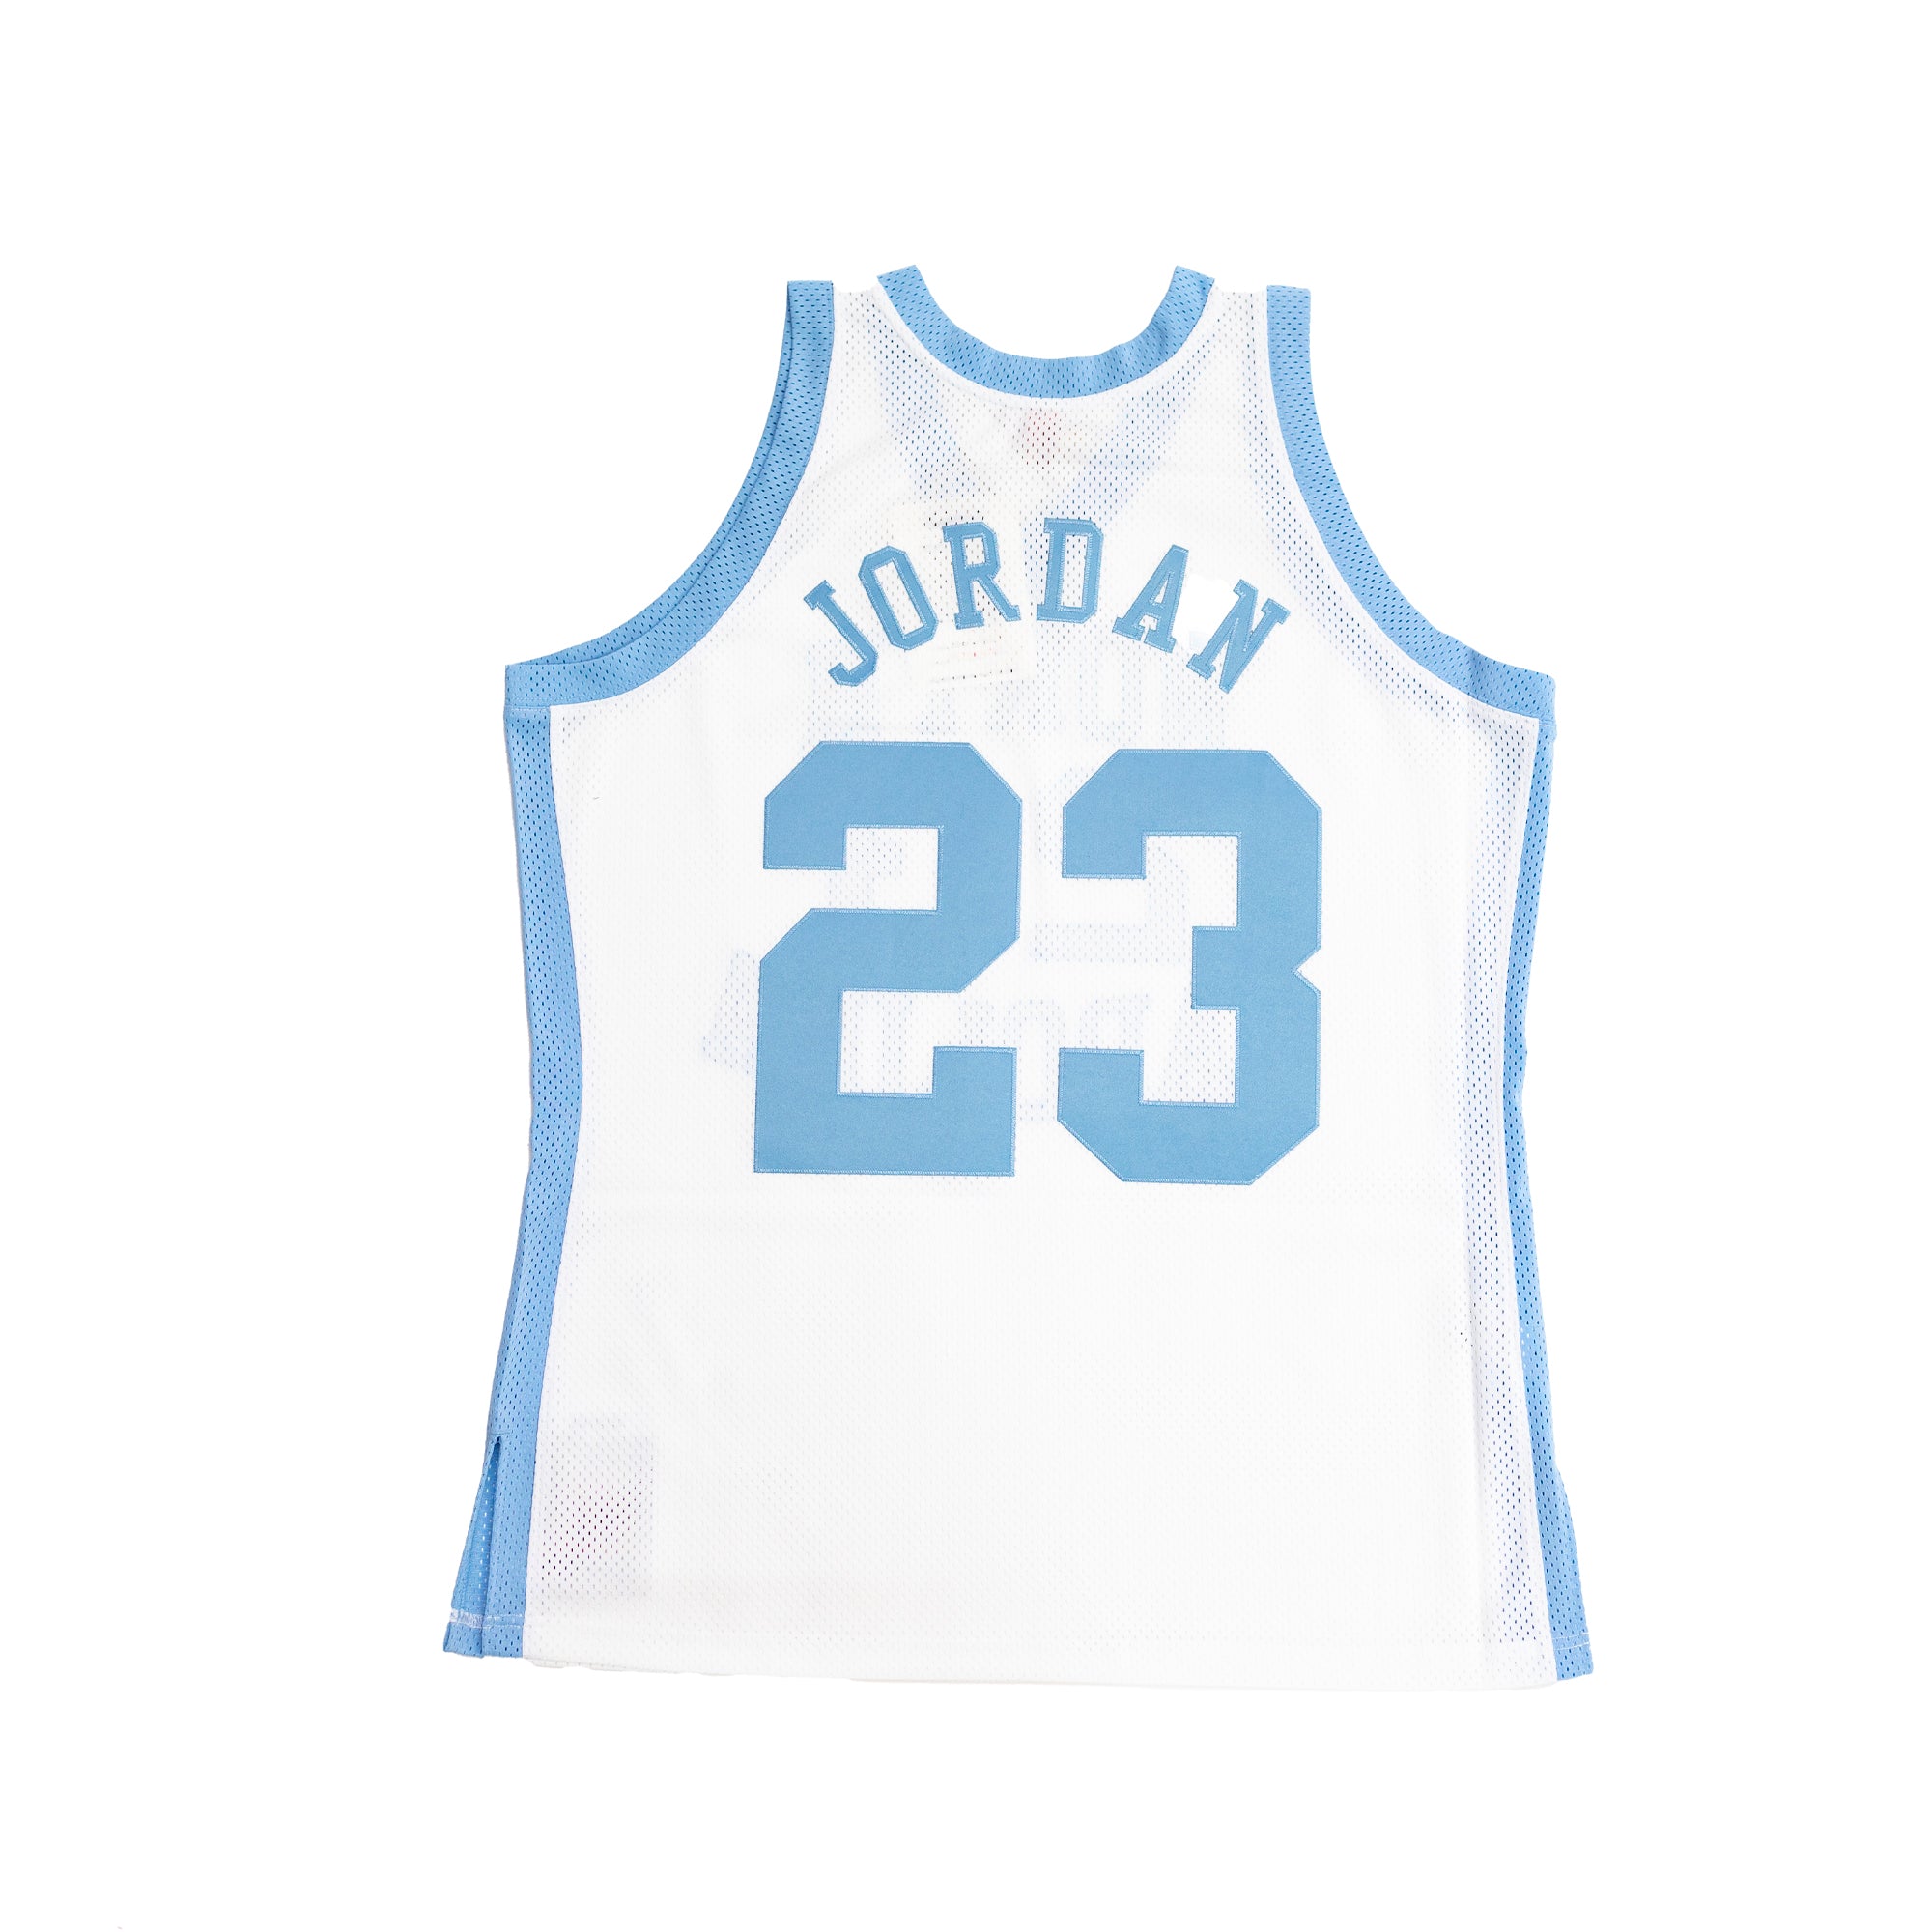 Mitchell & Ness Flagship Store on X: 1983-84 University of North Carolina  Authentic Jersey and Short. The 1983-84 Michael Jordan University of North  Carolina Authentic Jersey is available NOW at the Mitchell